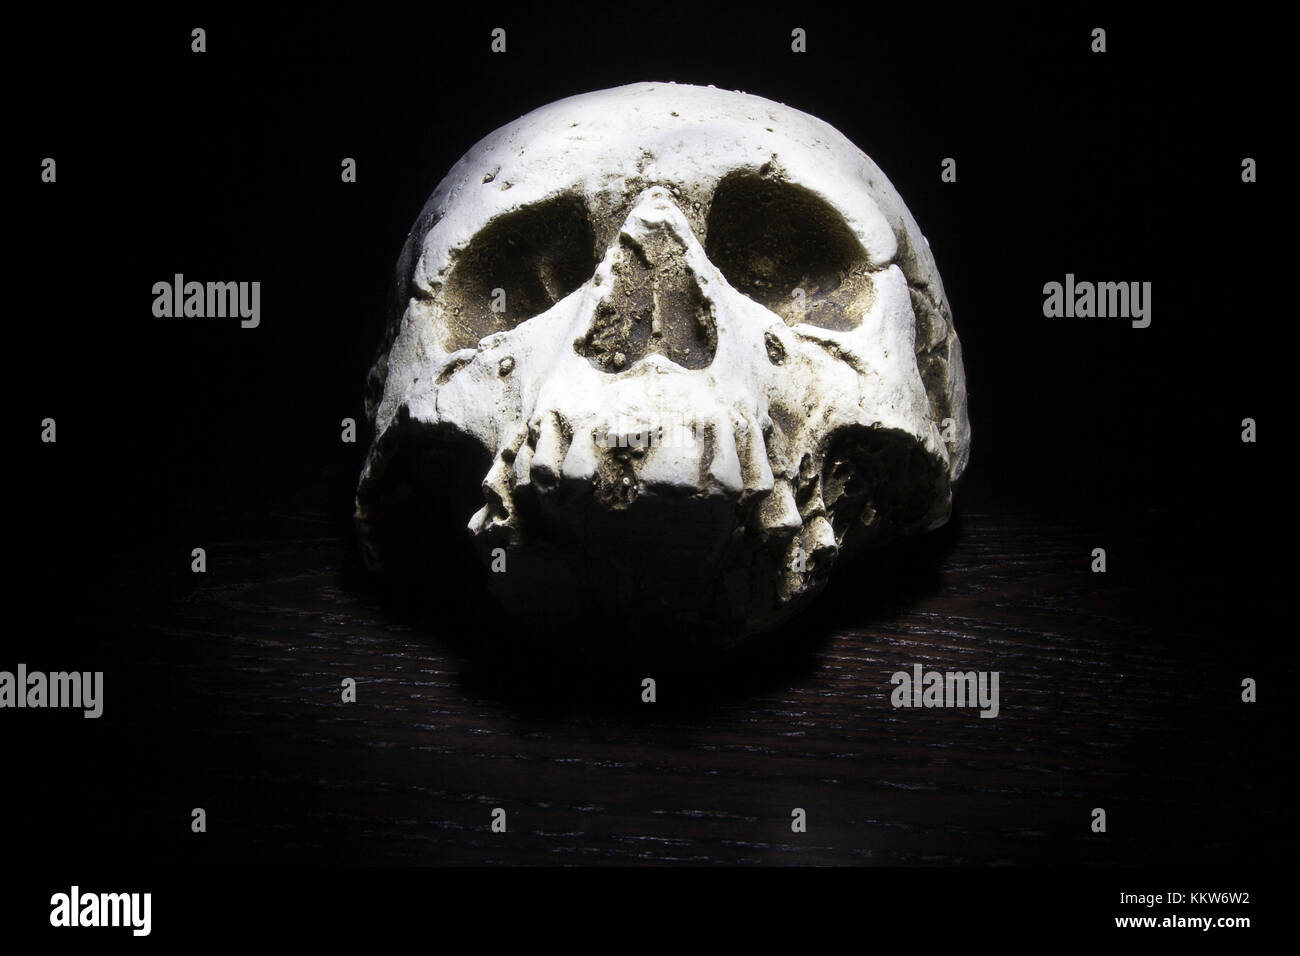 A scary skull with a dark background. Stock Photo